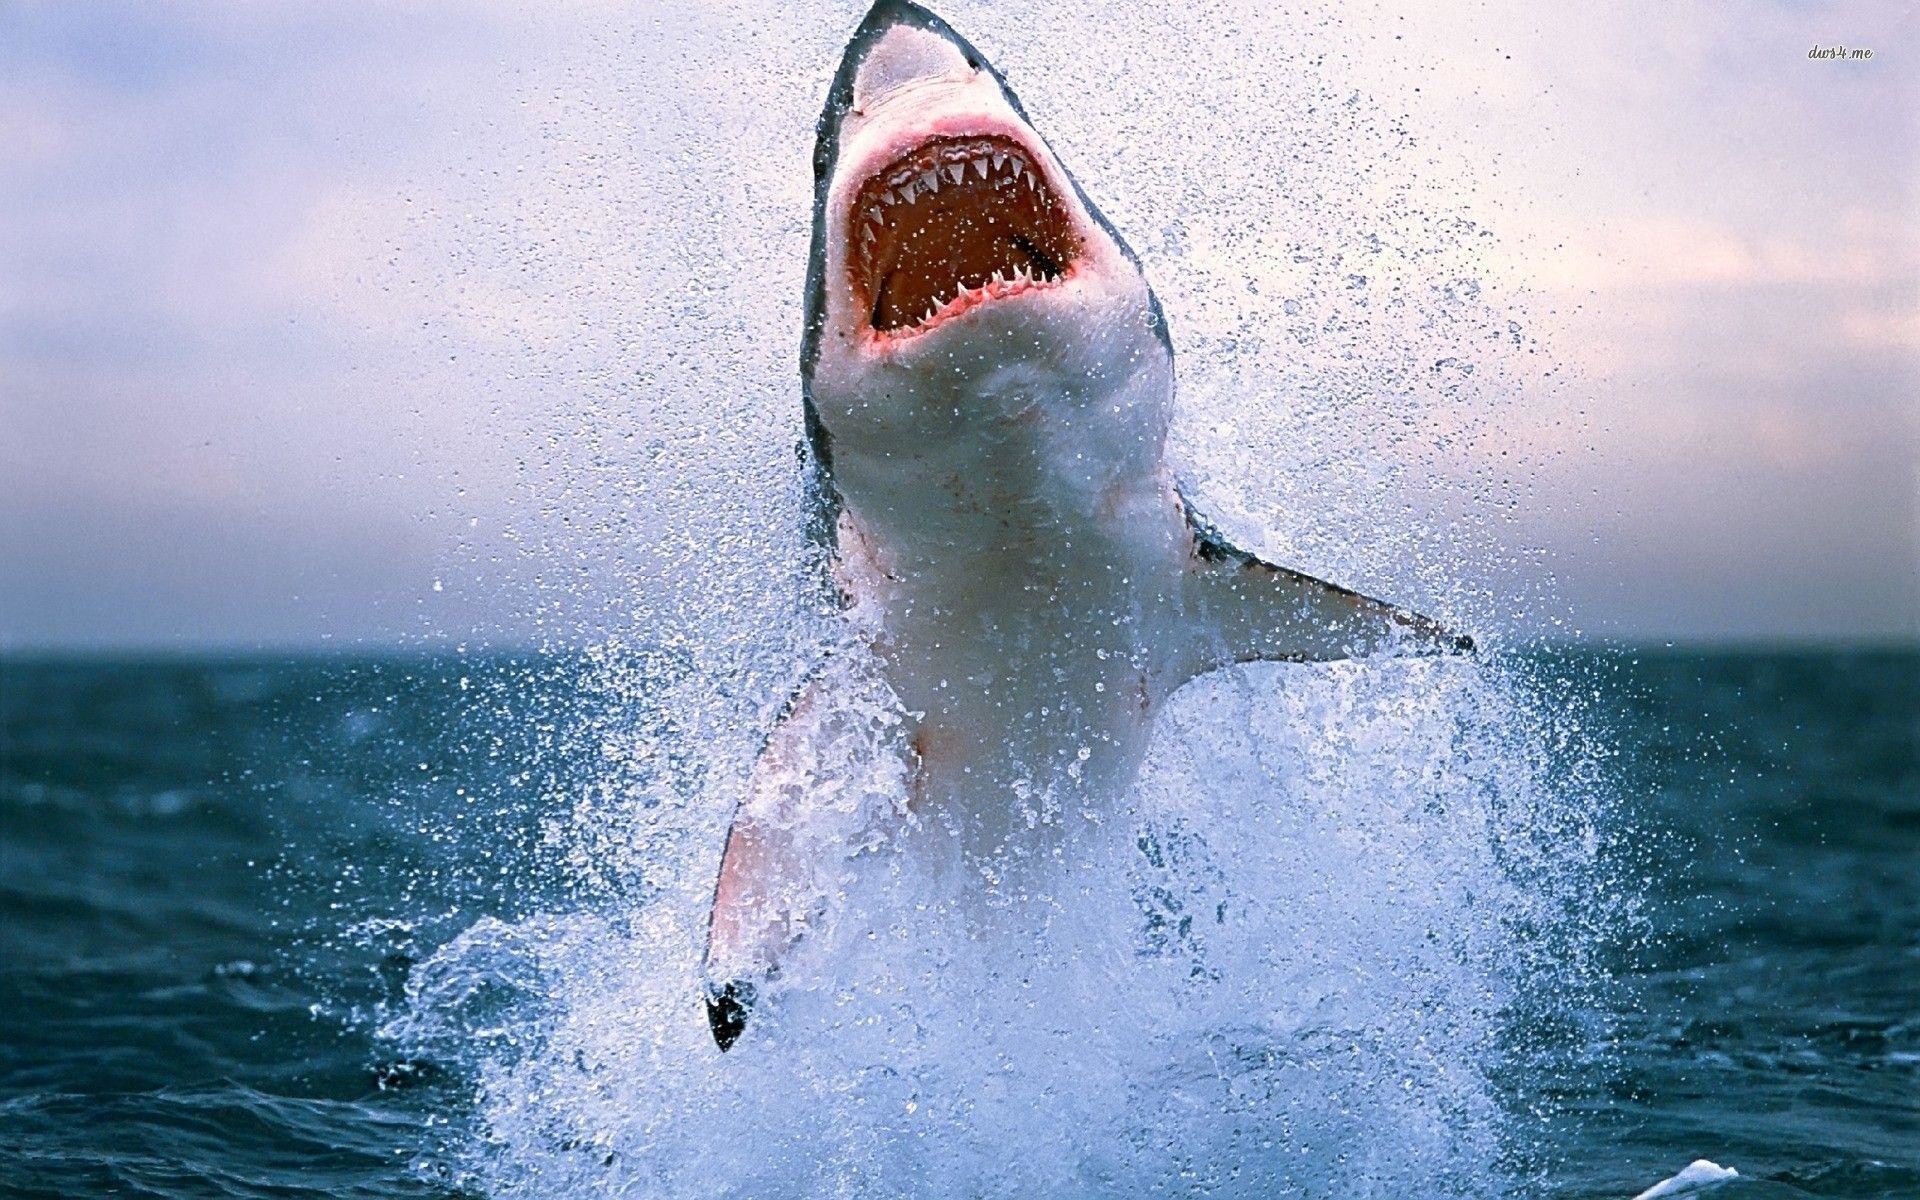 Great White Shark Iphone Wallpapers